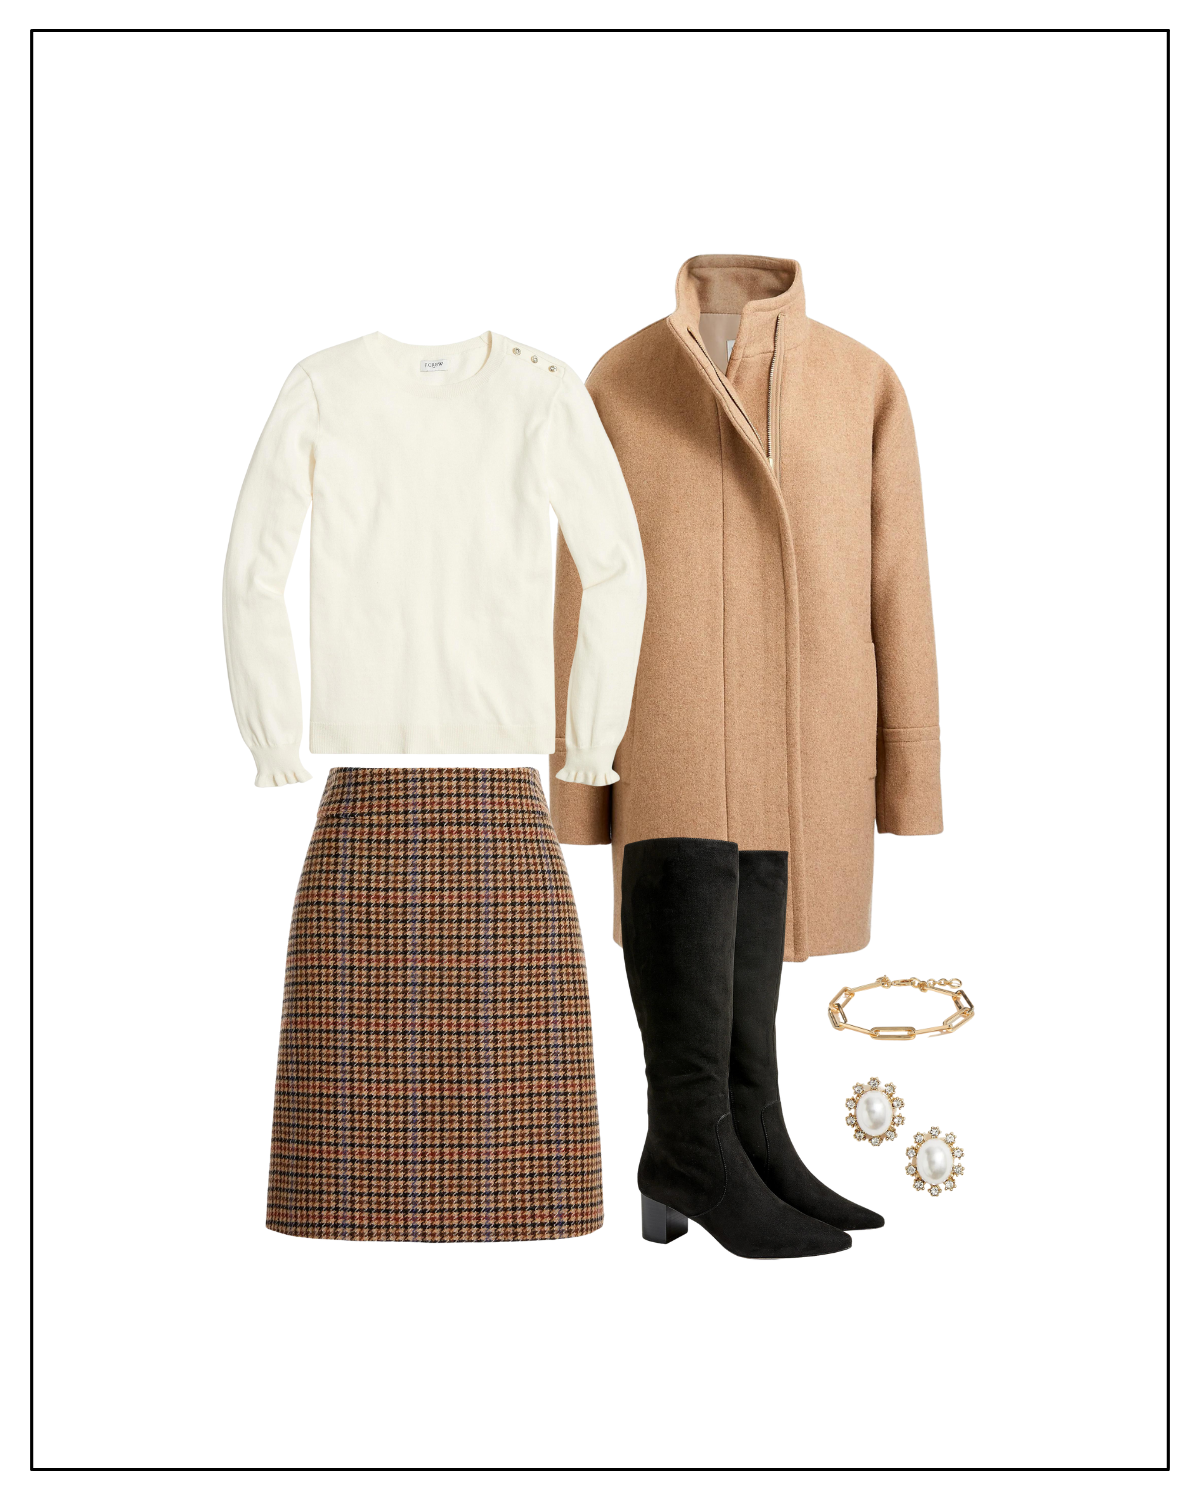 3 Thanksgiving Outfit Ideas